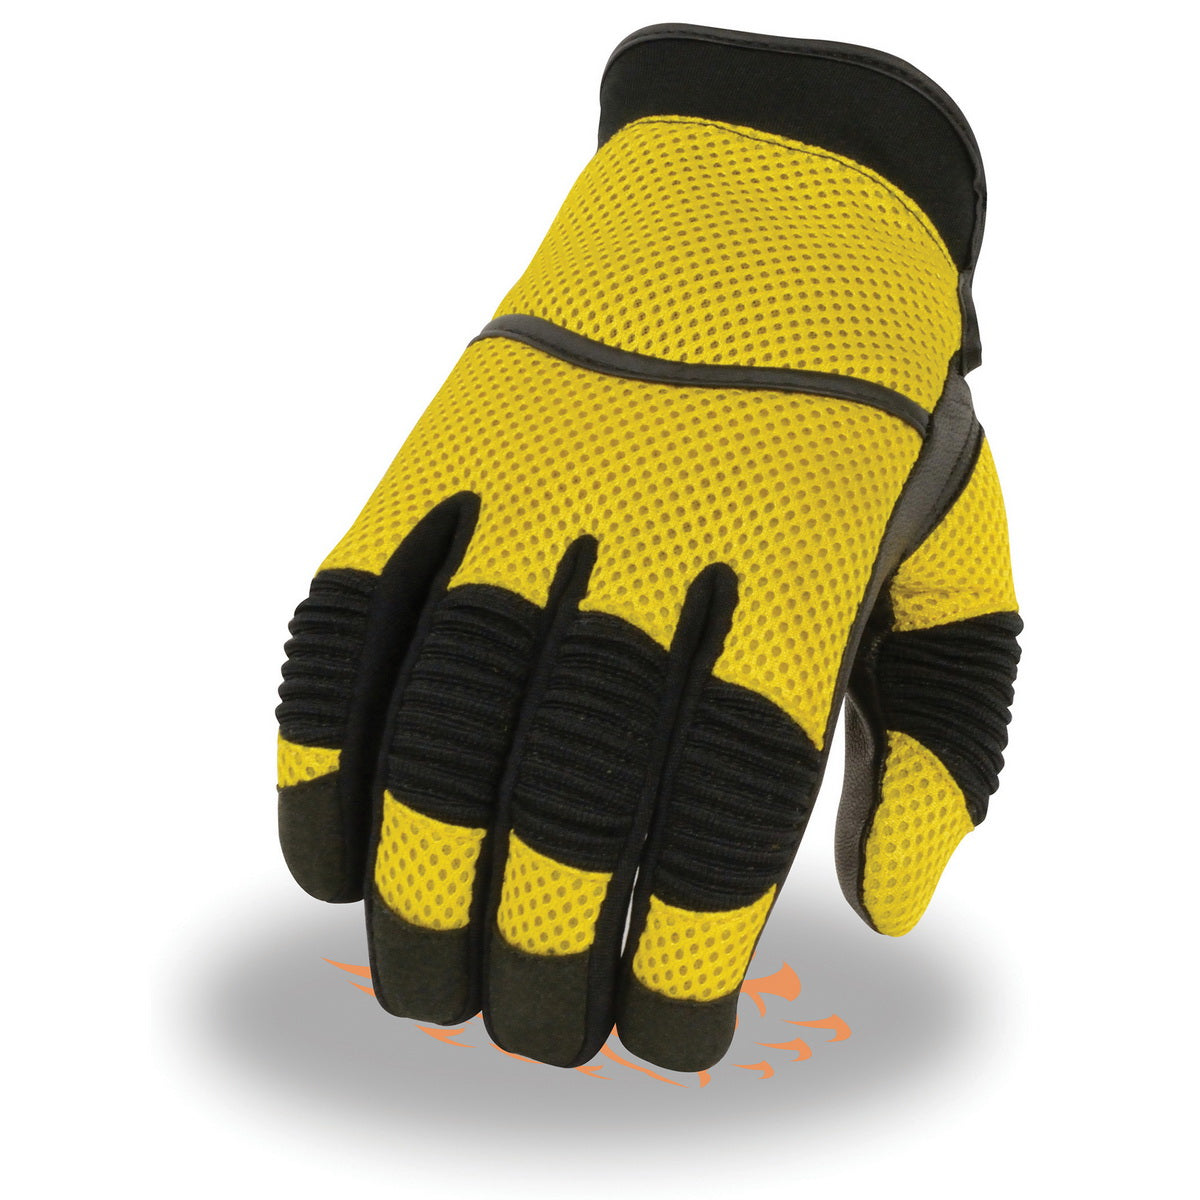 Xelement XG791 Men's Black and Yellow Mesh and Leather Racing Gloves